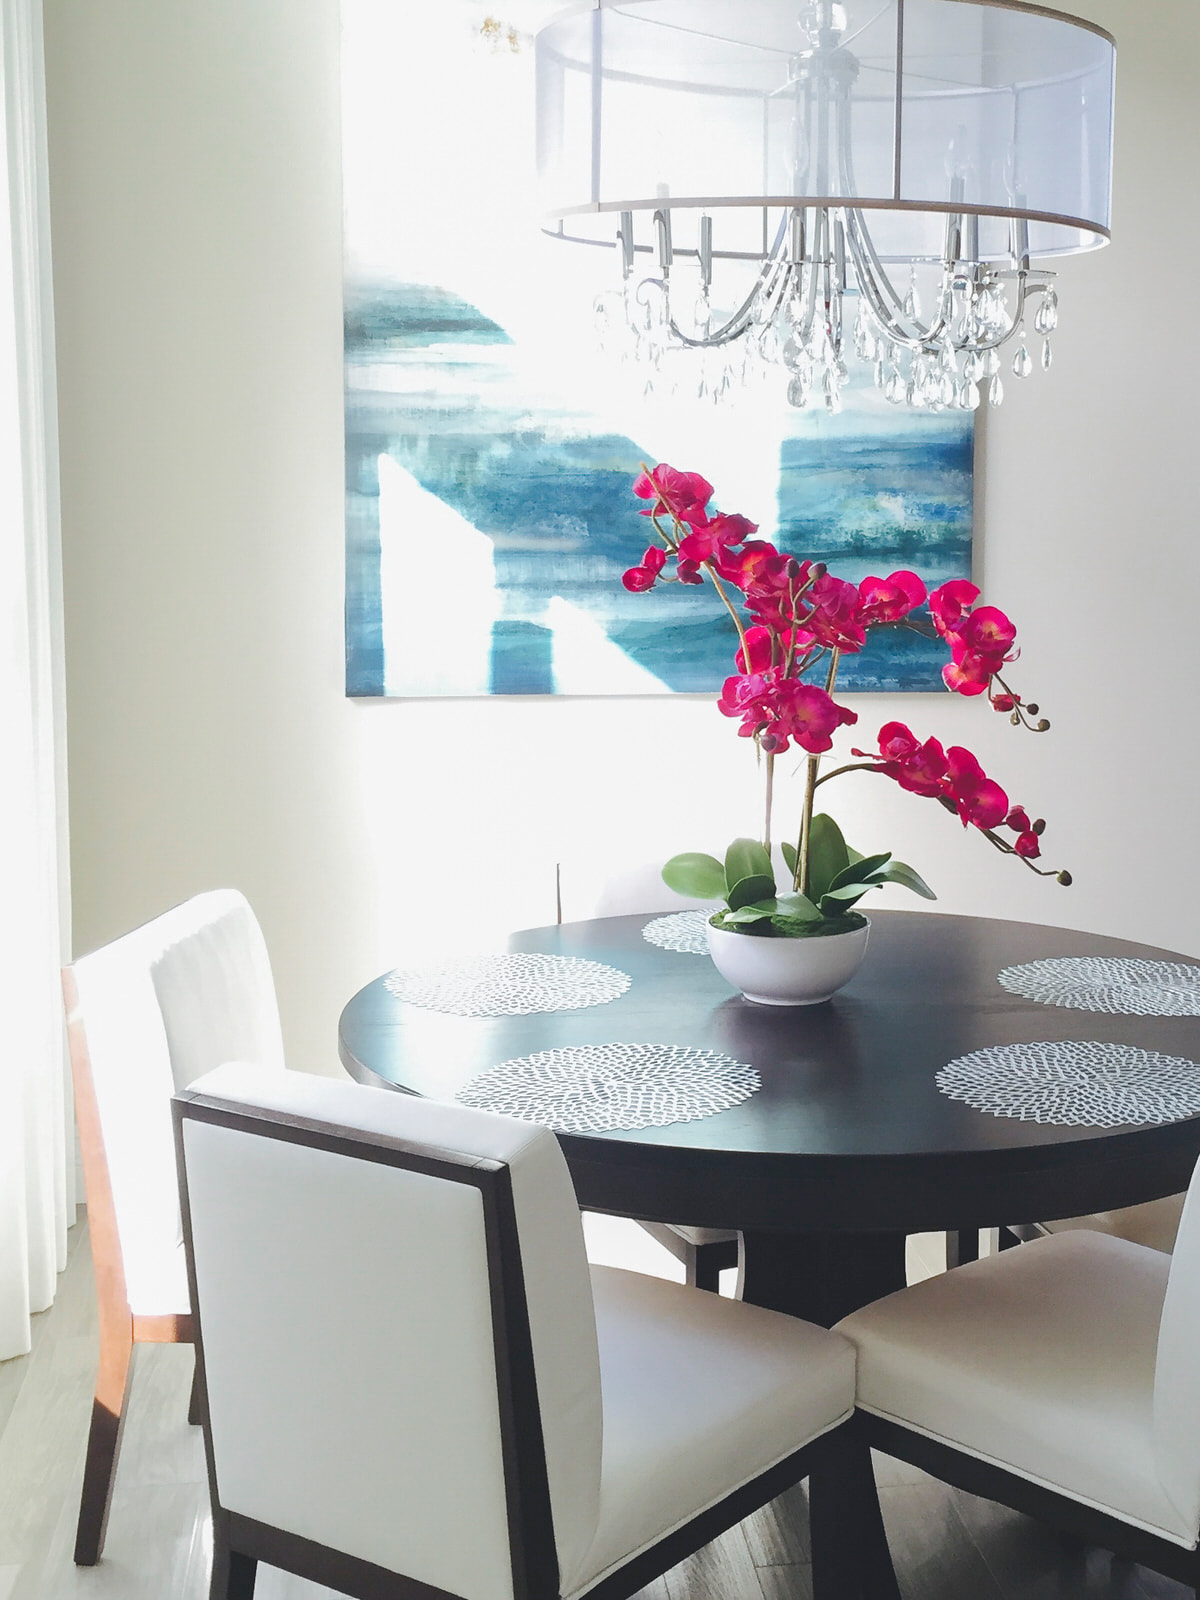 details of dining space with bright colored orchid center piece